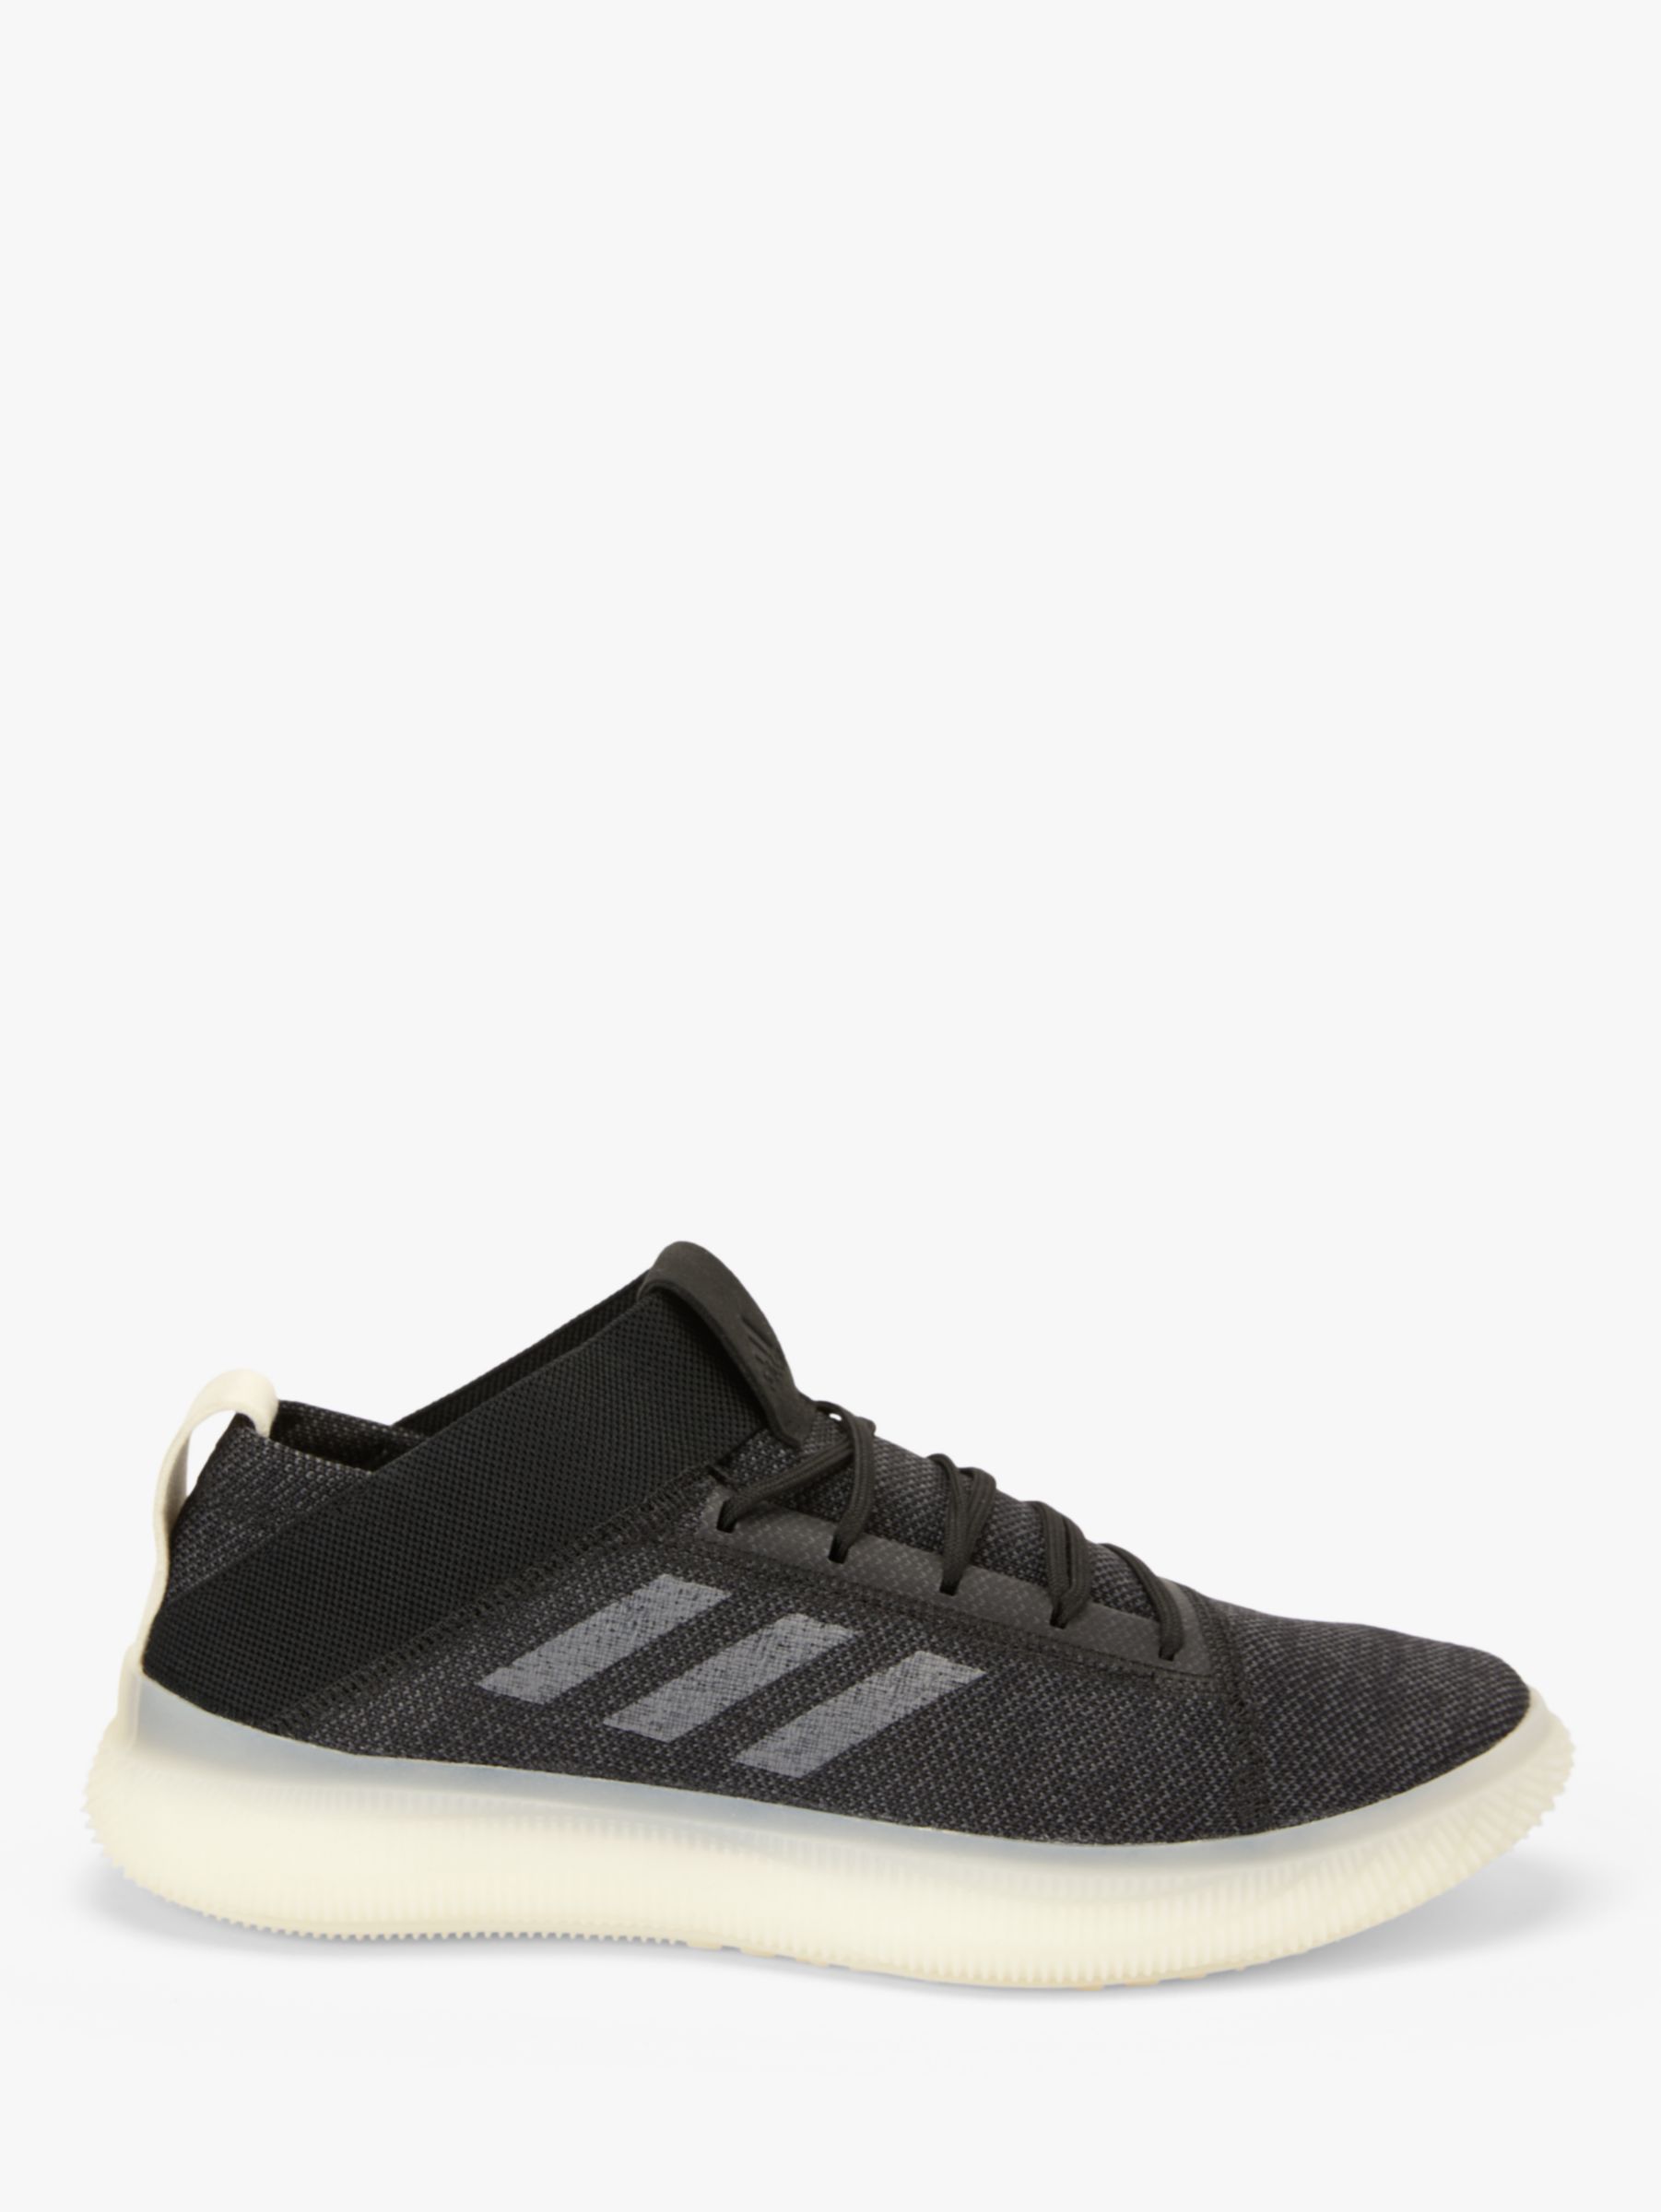 mens adidas pure boost trainers